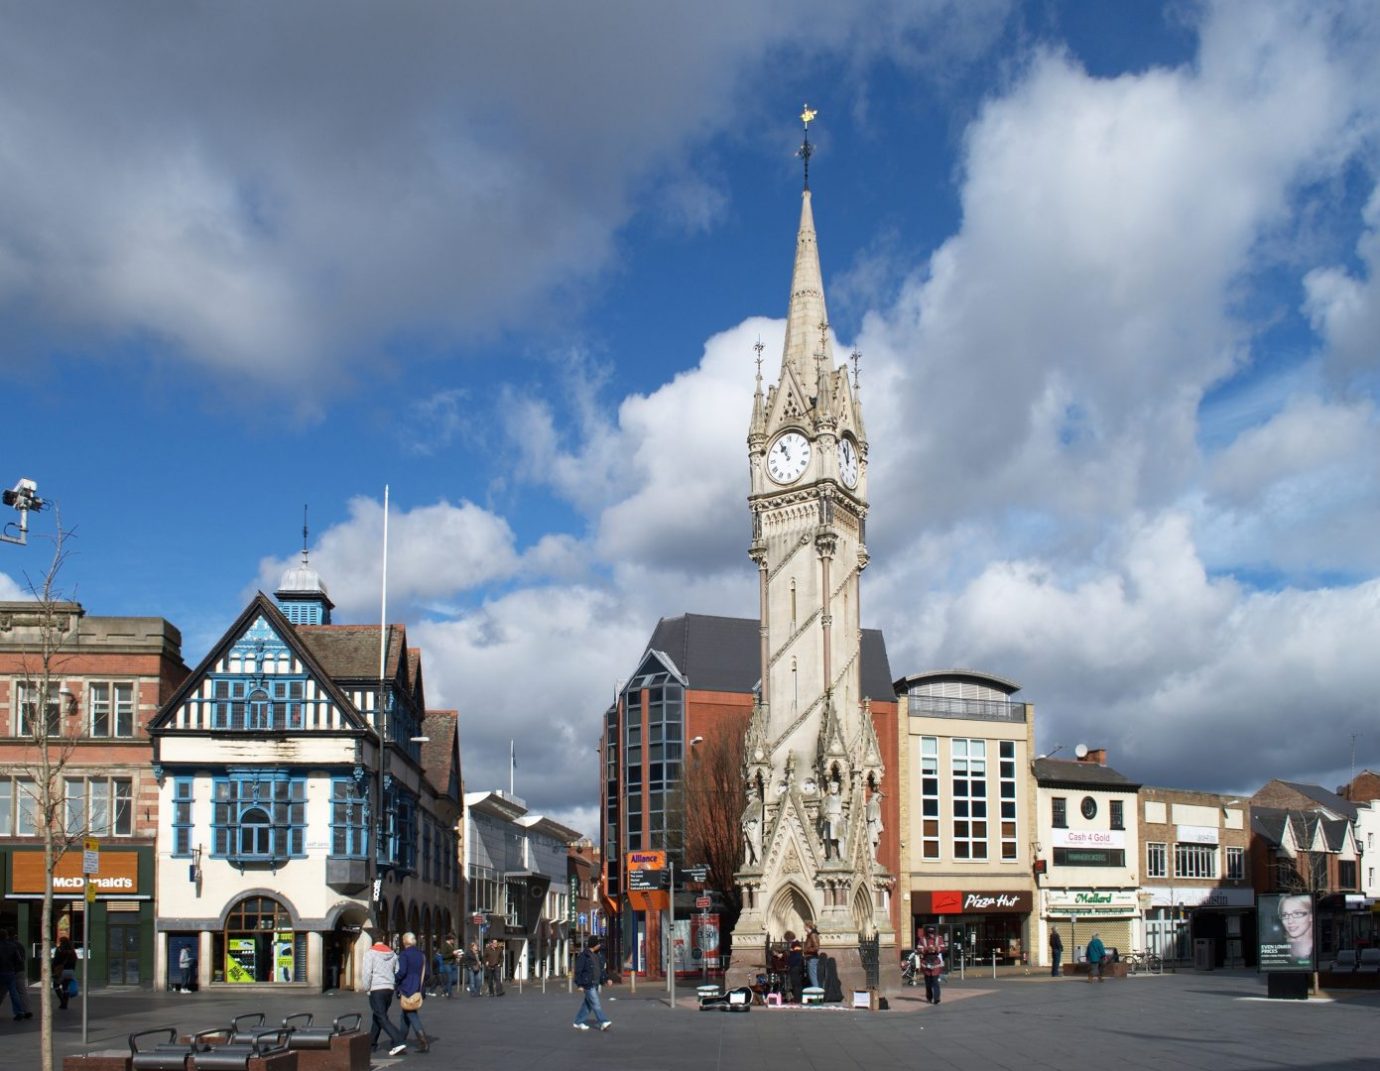 Much of Leicester’s commerce lies in the engineering, retail, and food and drink sectors